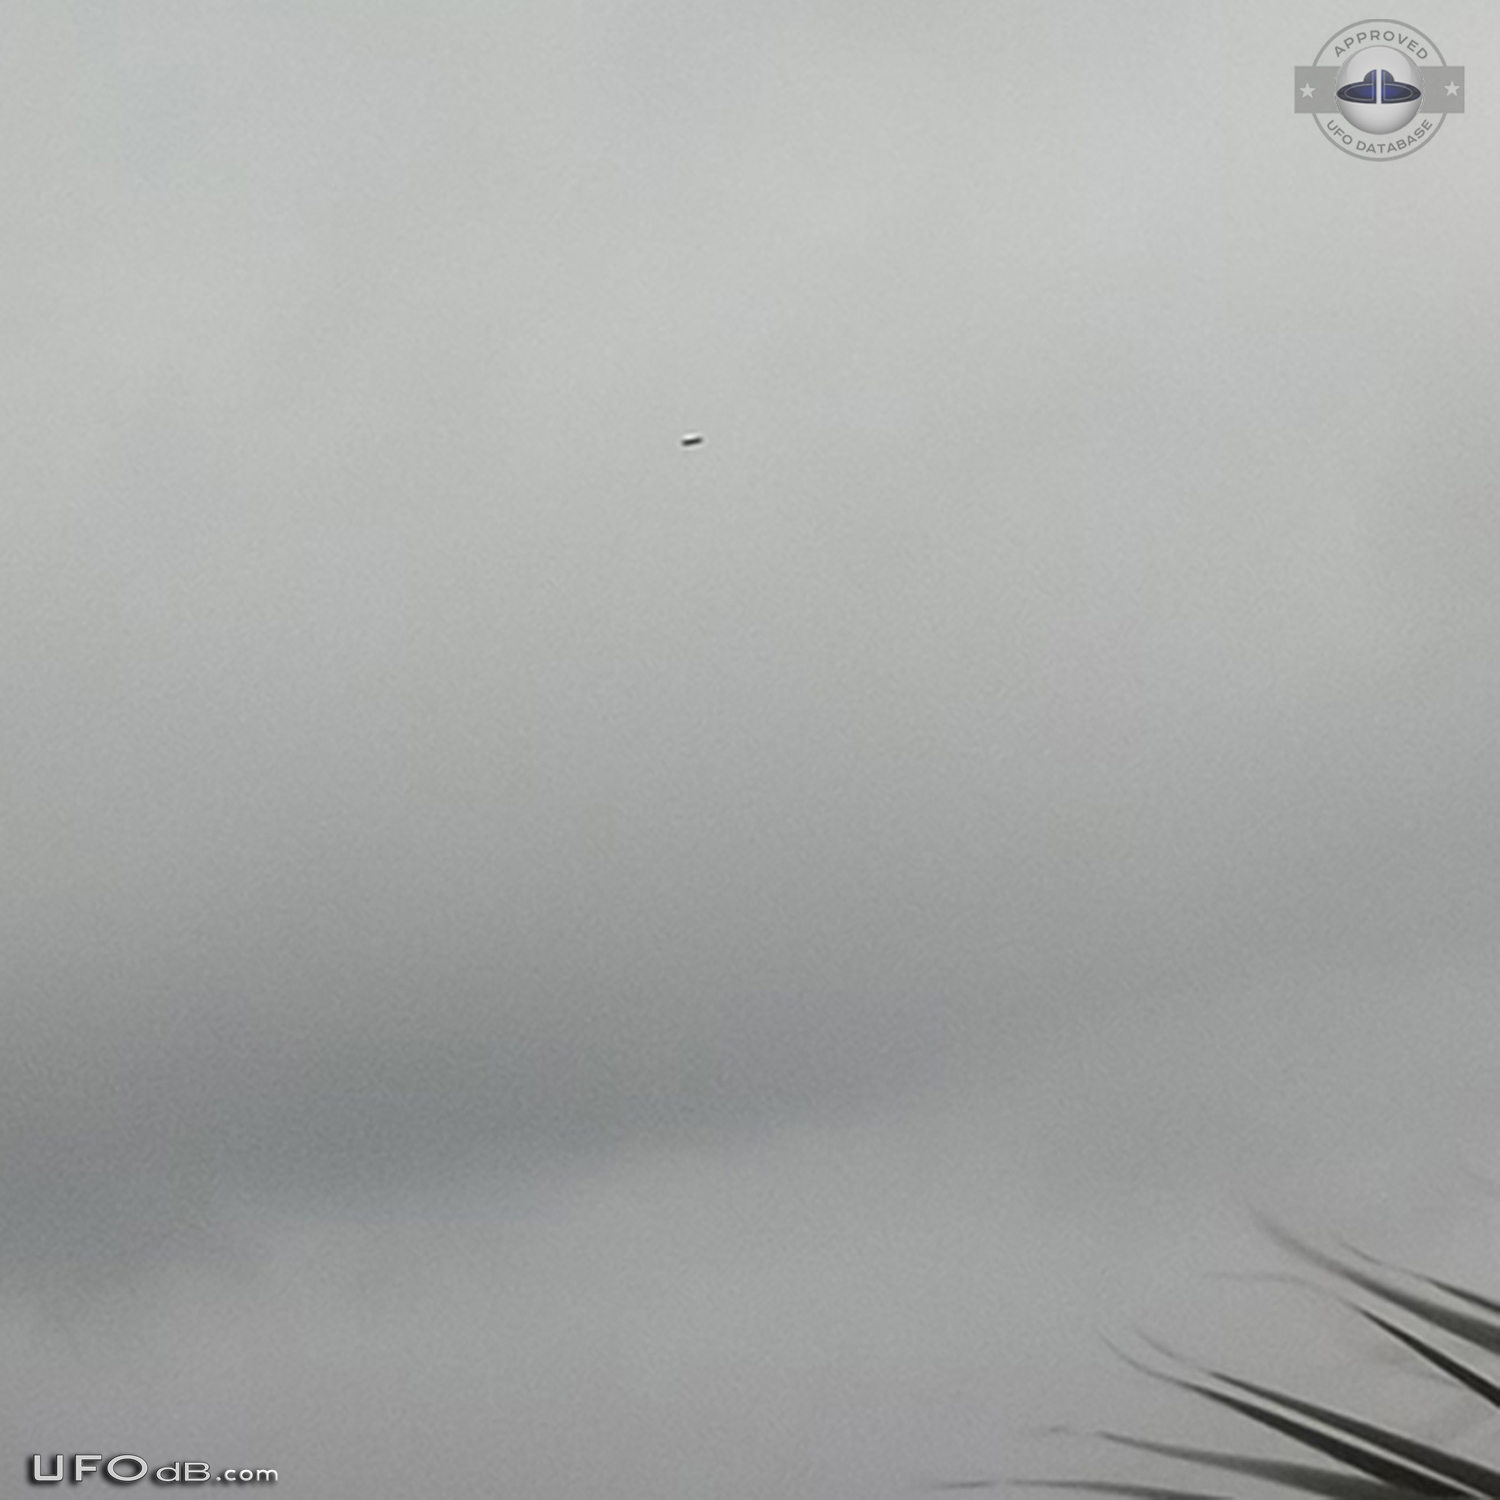 3 disc shaped UFOs seen over Siracusa Sicily Italy january 2014 UFO Picture #599-1